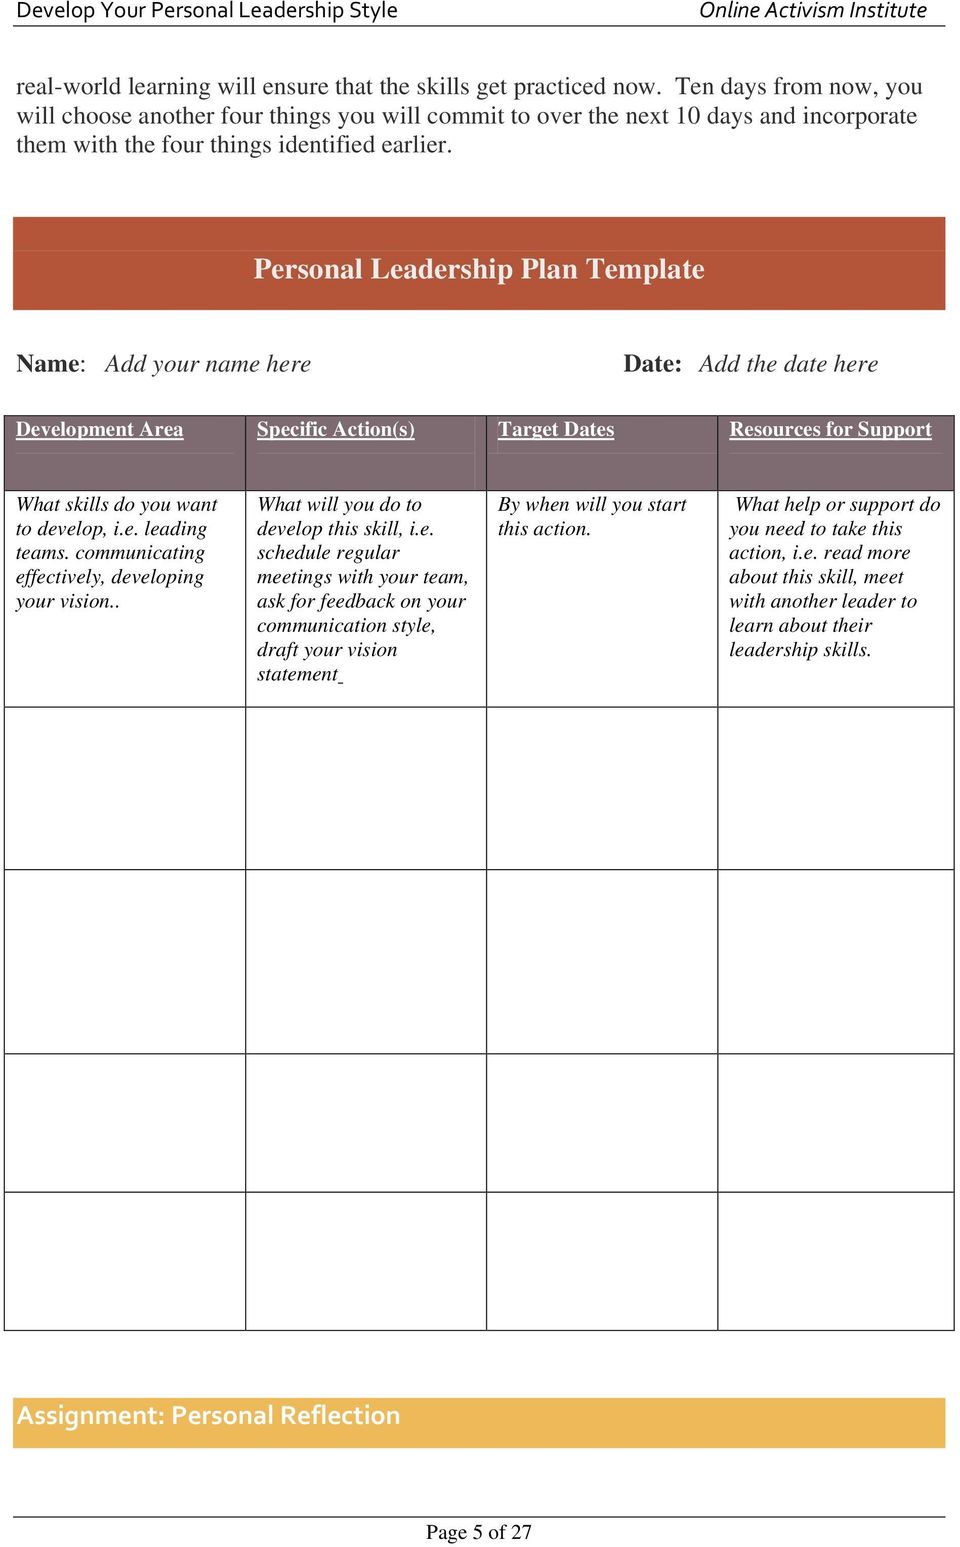 Personal Leadership Plan Template Name: Add your name here Date: Add the date here Development Area Specific Action(s) Target Dates Resources for Support What skills do you want to develop, i.e. leading teams.